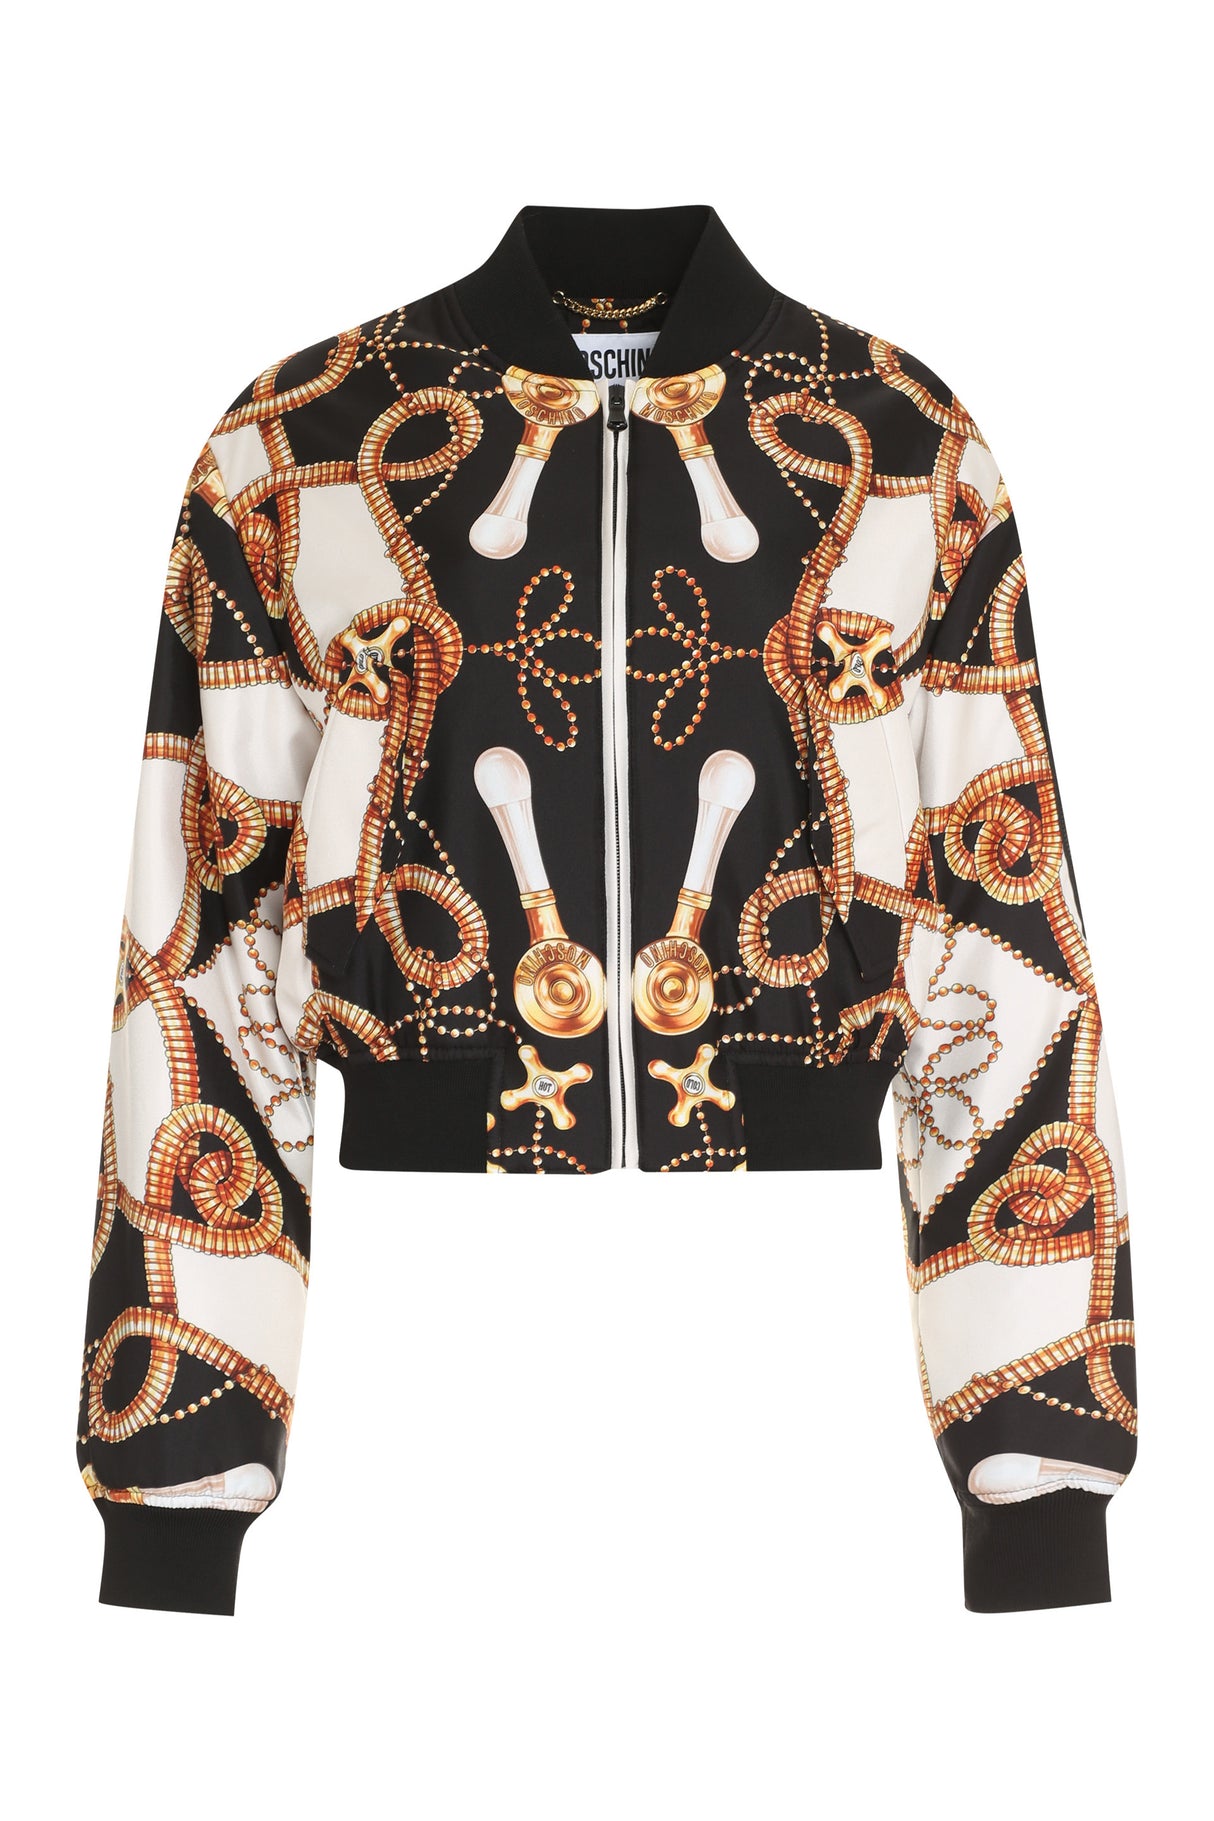 MOSCHINO COUTURE Black Printed Bomber Jacket for Women - FW22 Collection